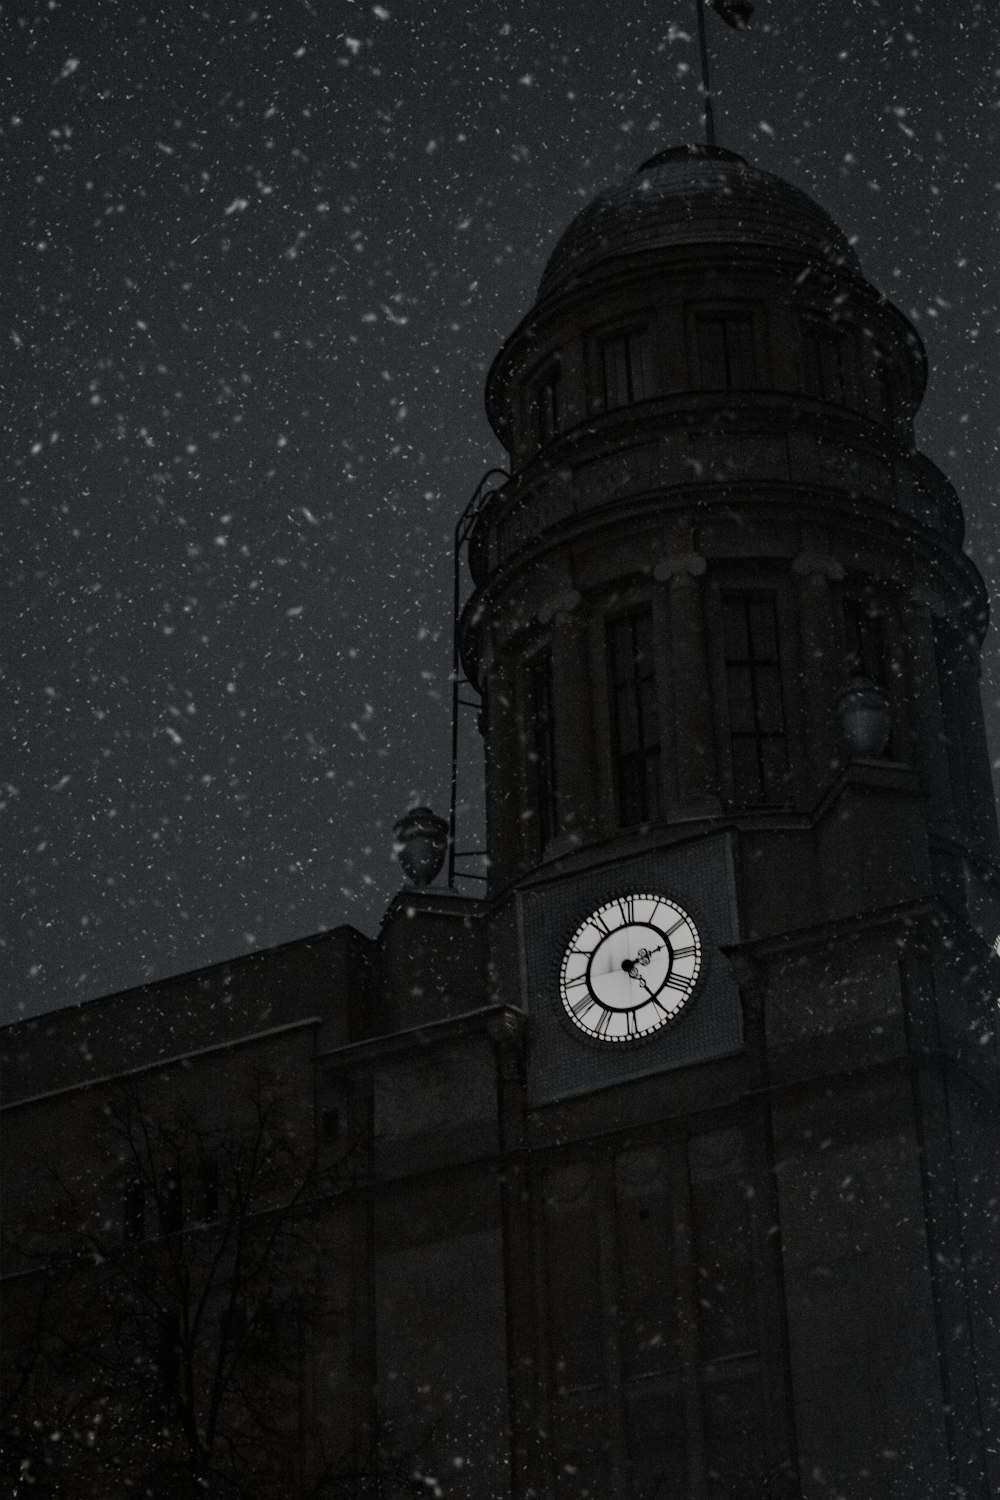 a clock on a building in the snow